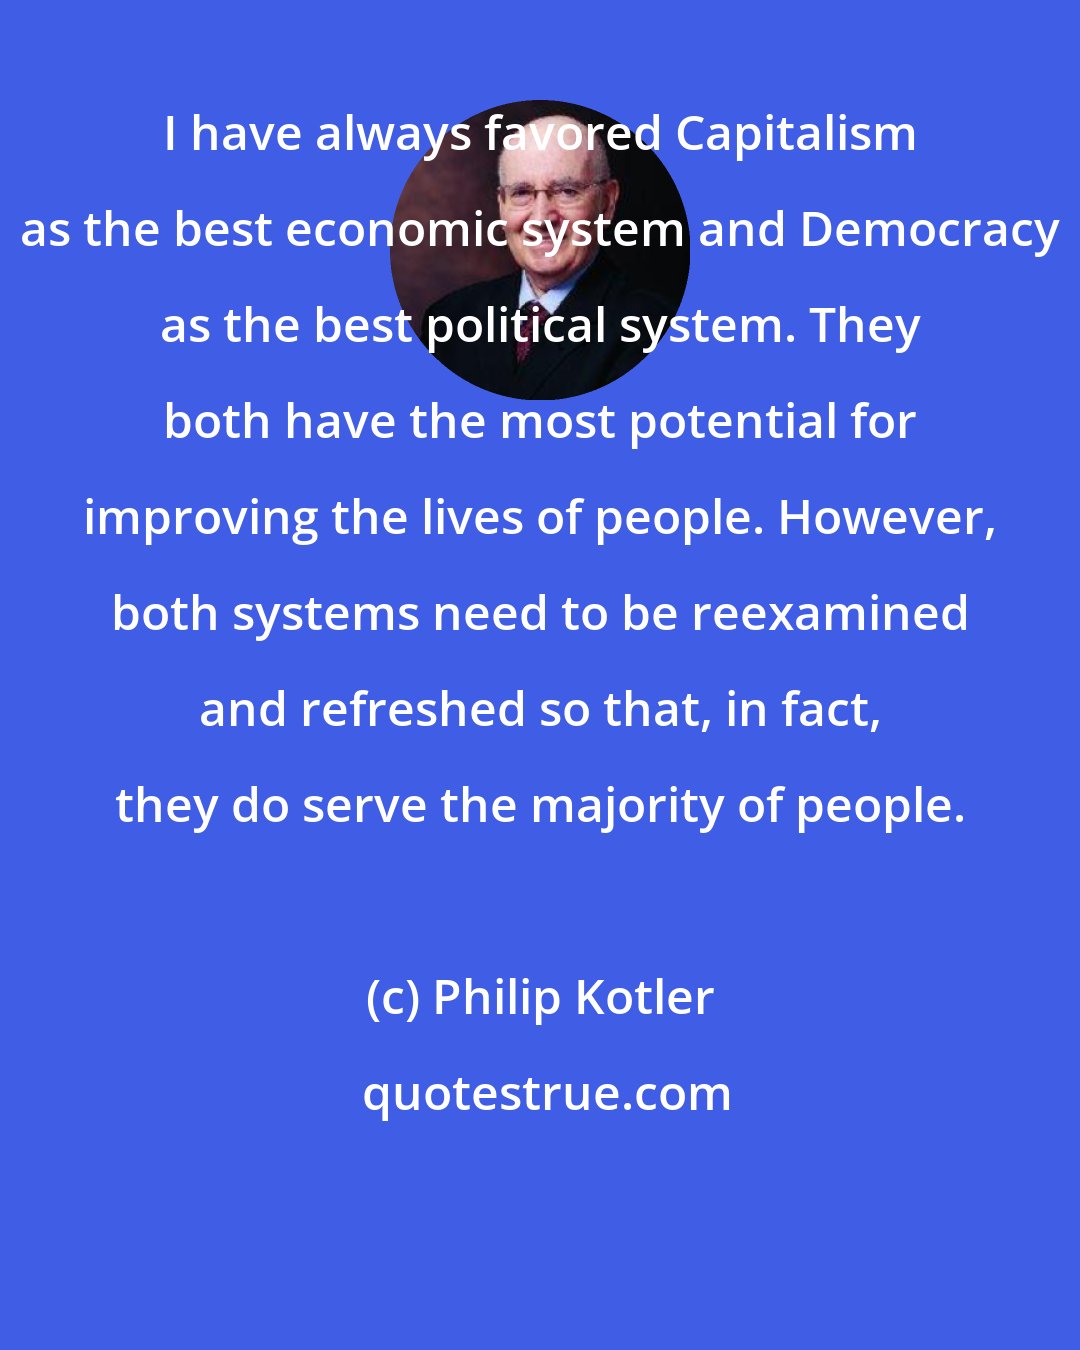 Philip Kotler: I have always favored Capitalism as the best economic system and Democracy as the best political system. They both have the most potential for improving the lives of people. However, both systems need to be reexamined and refreshed so that, in fact, they do serve the majority of people.